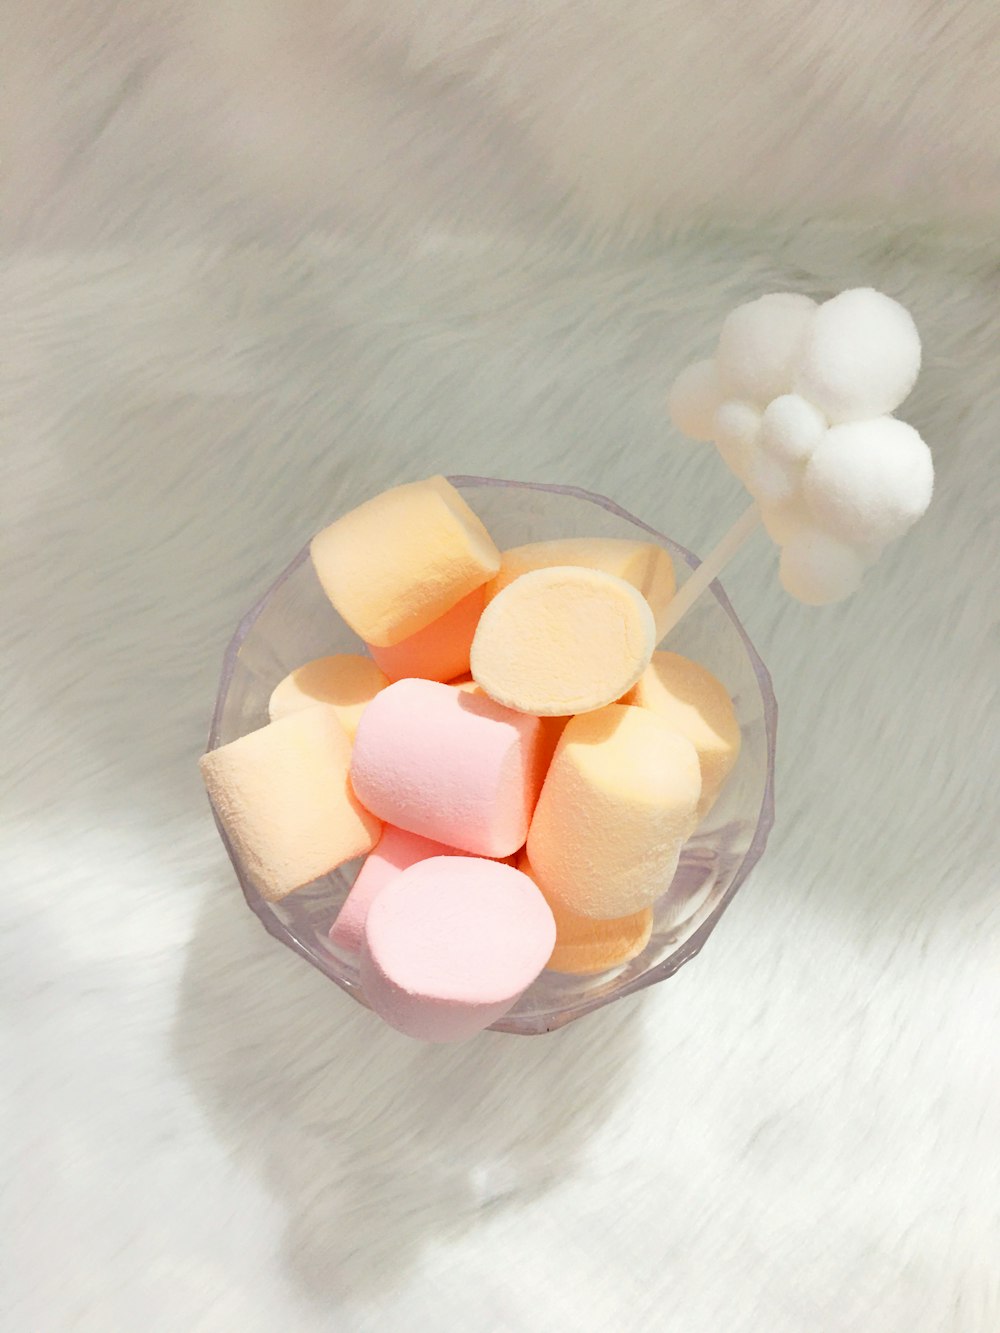 white heart shaped candies in clear glass bowl